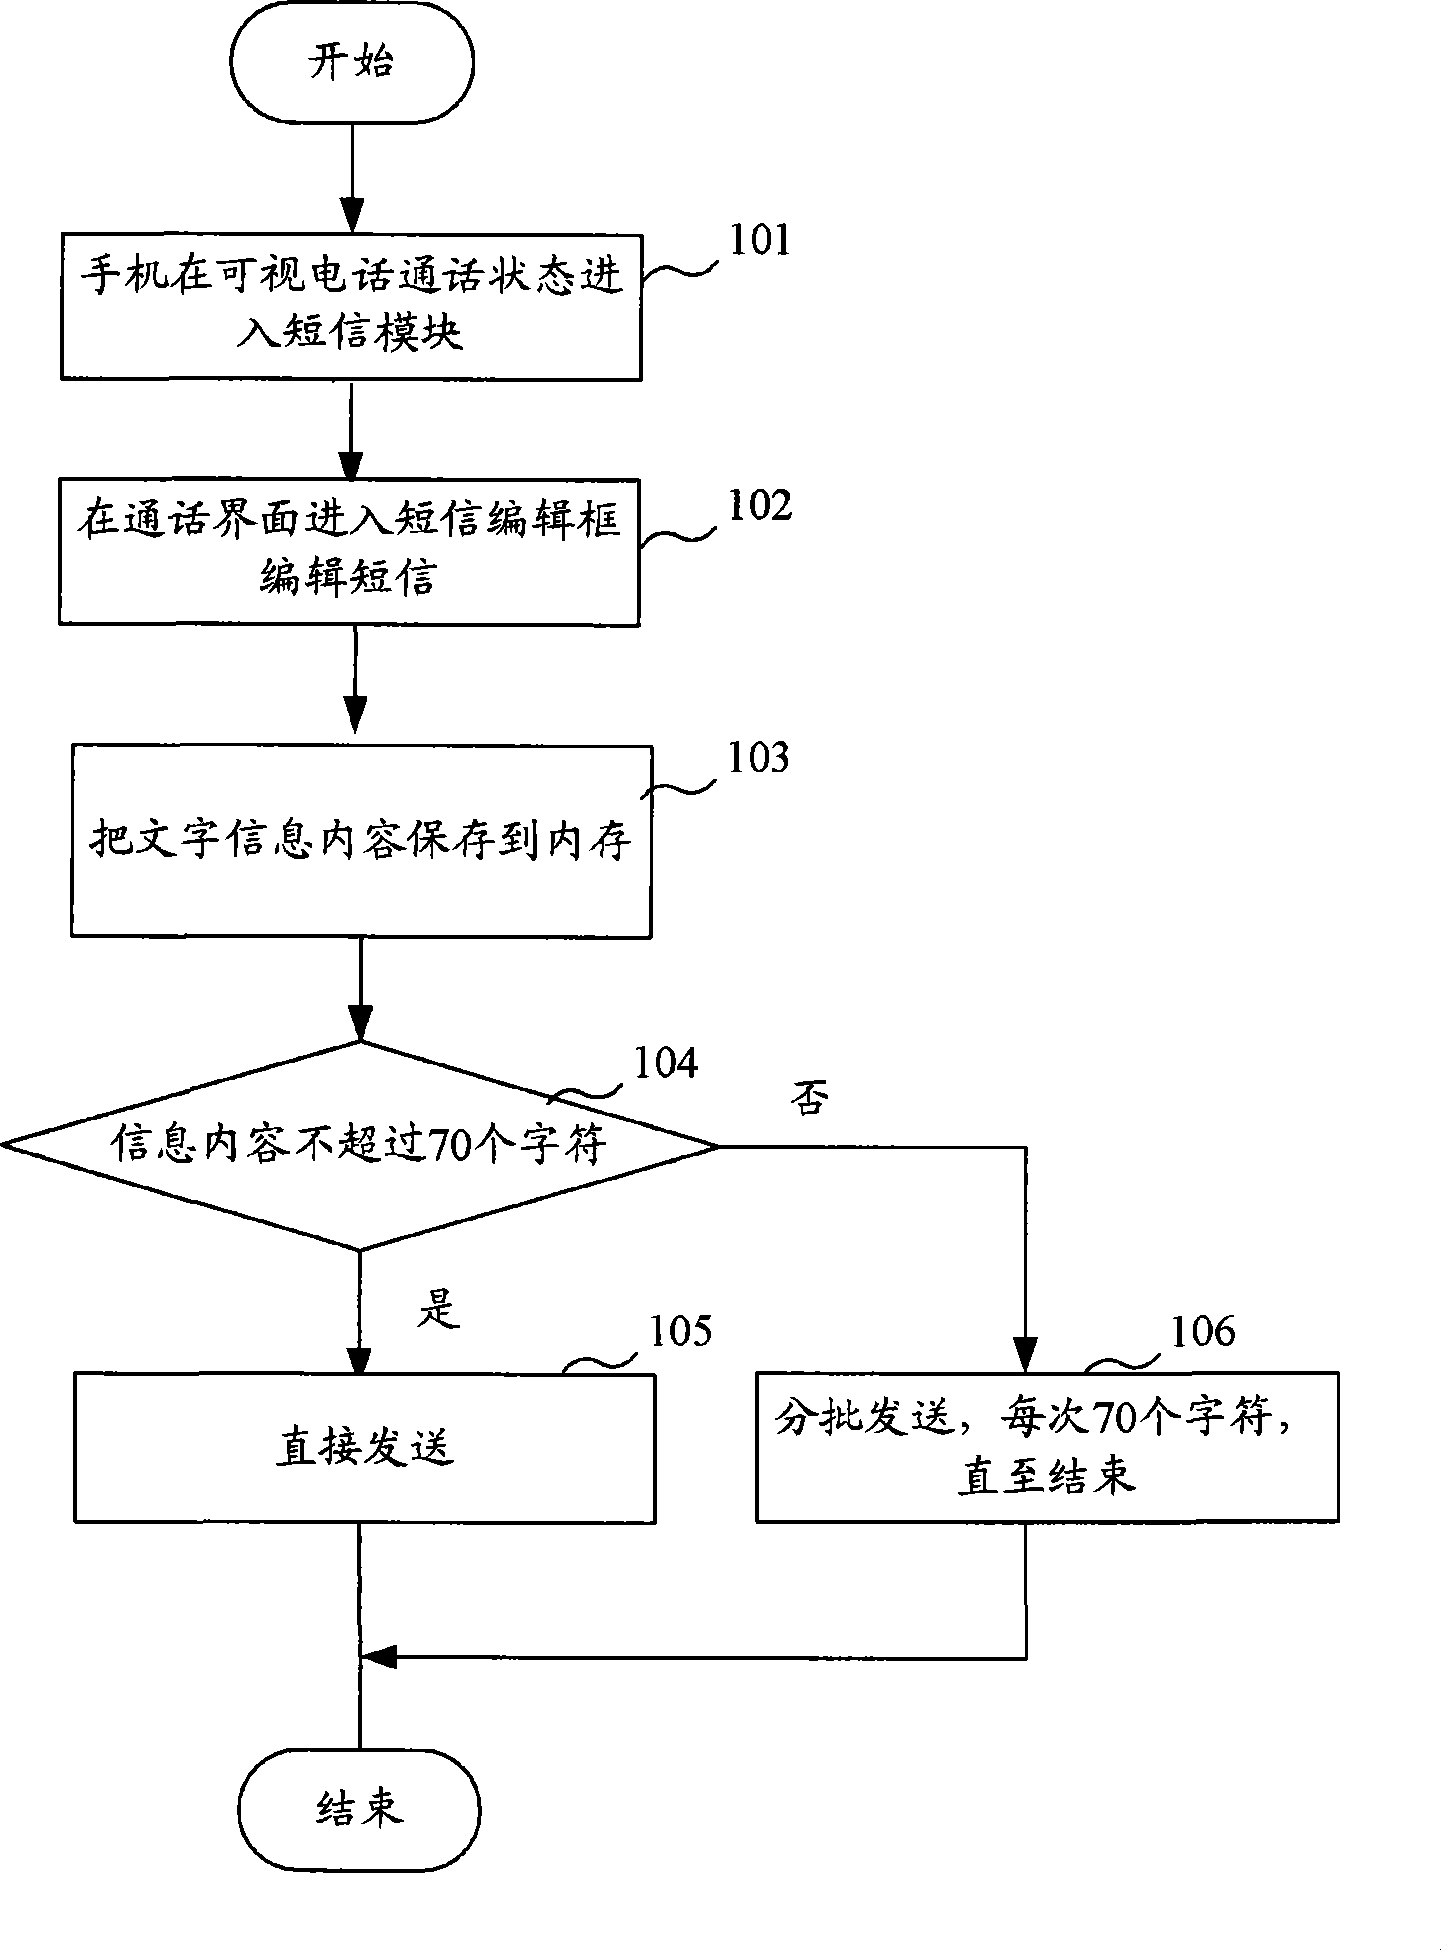 Text information transferring method in visual telephone calling